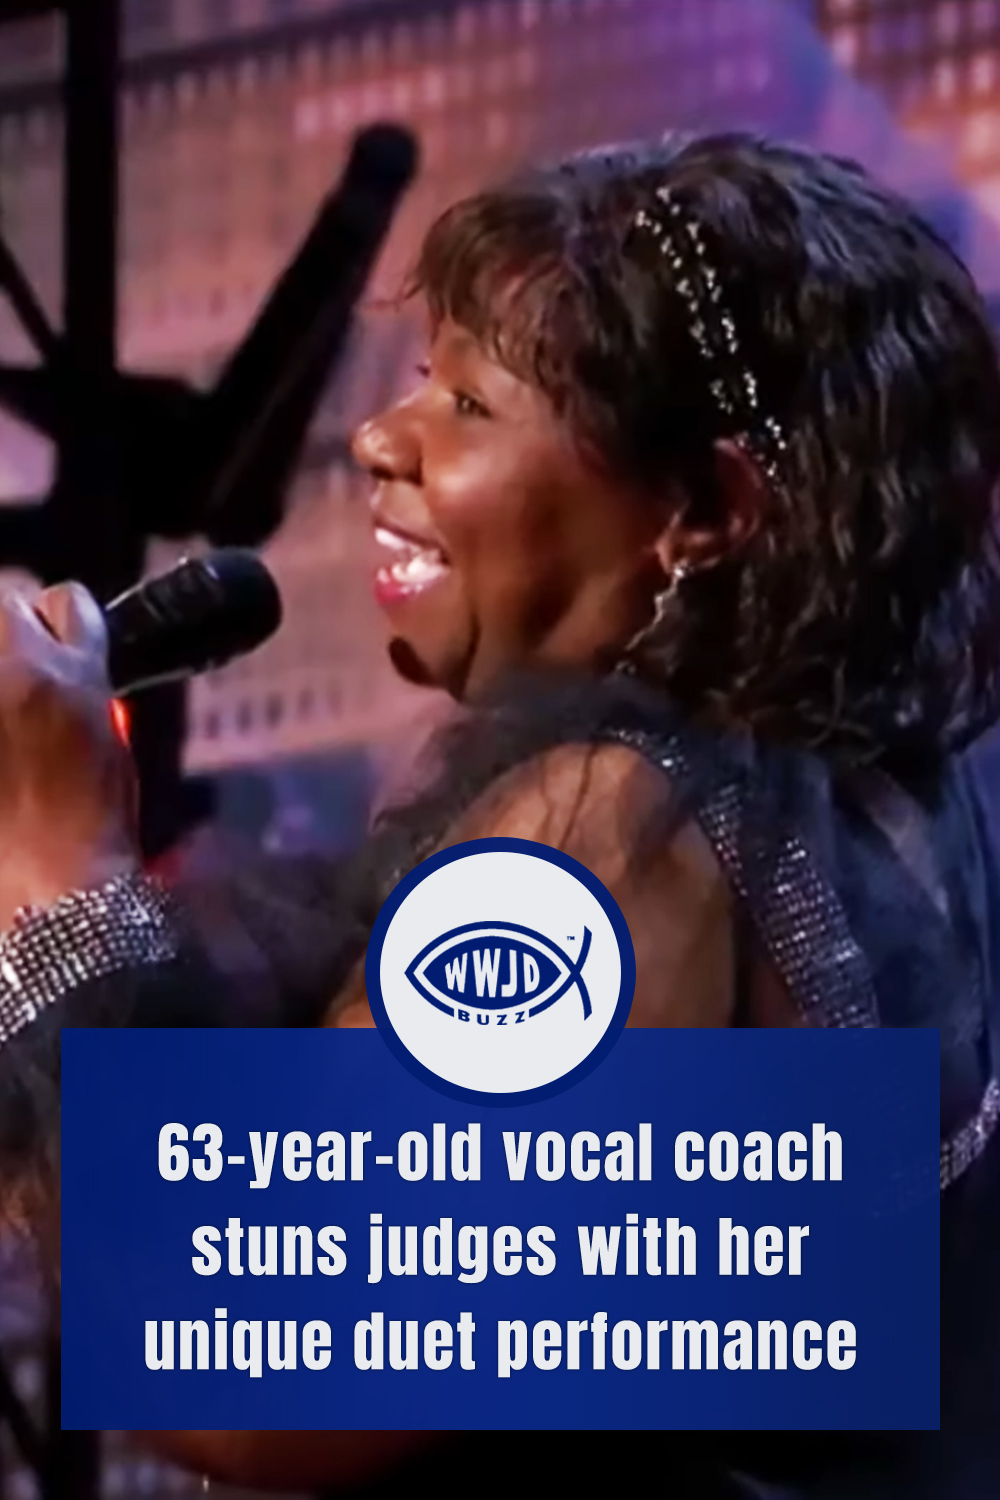 63-year-old vocal coach stuns judges with her unique duet performance